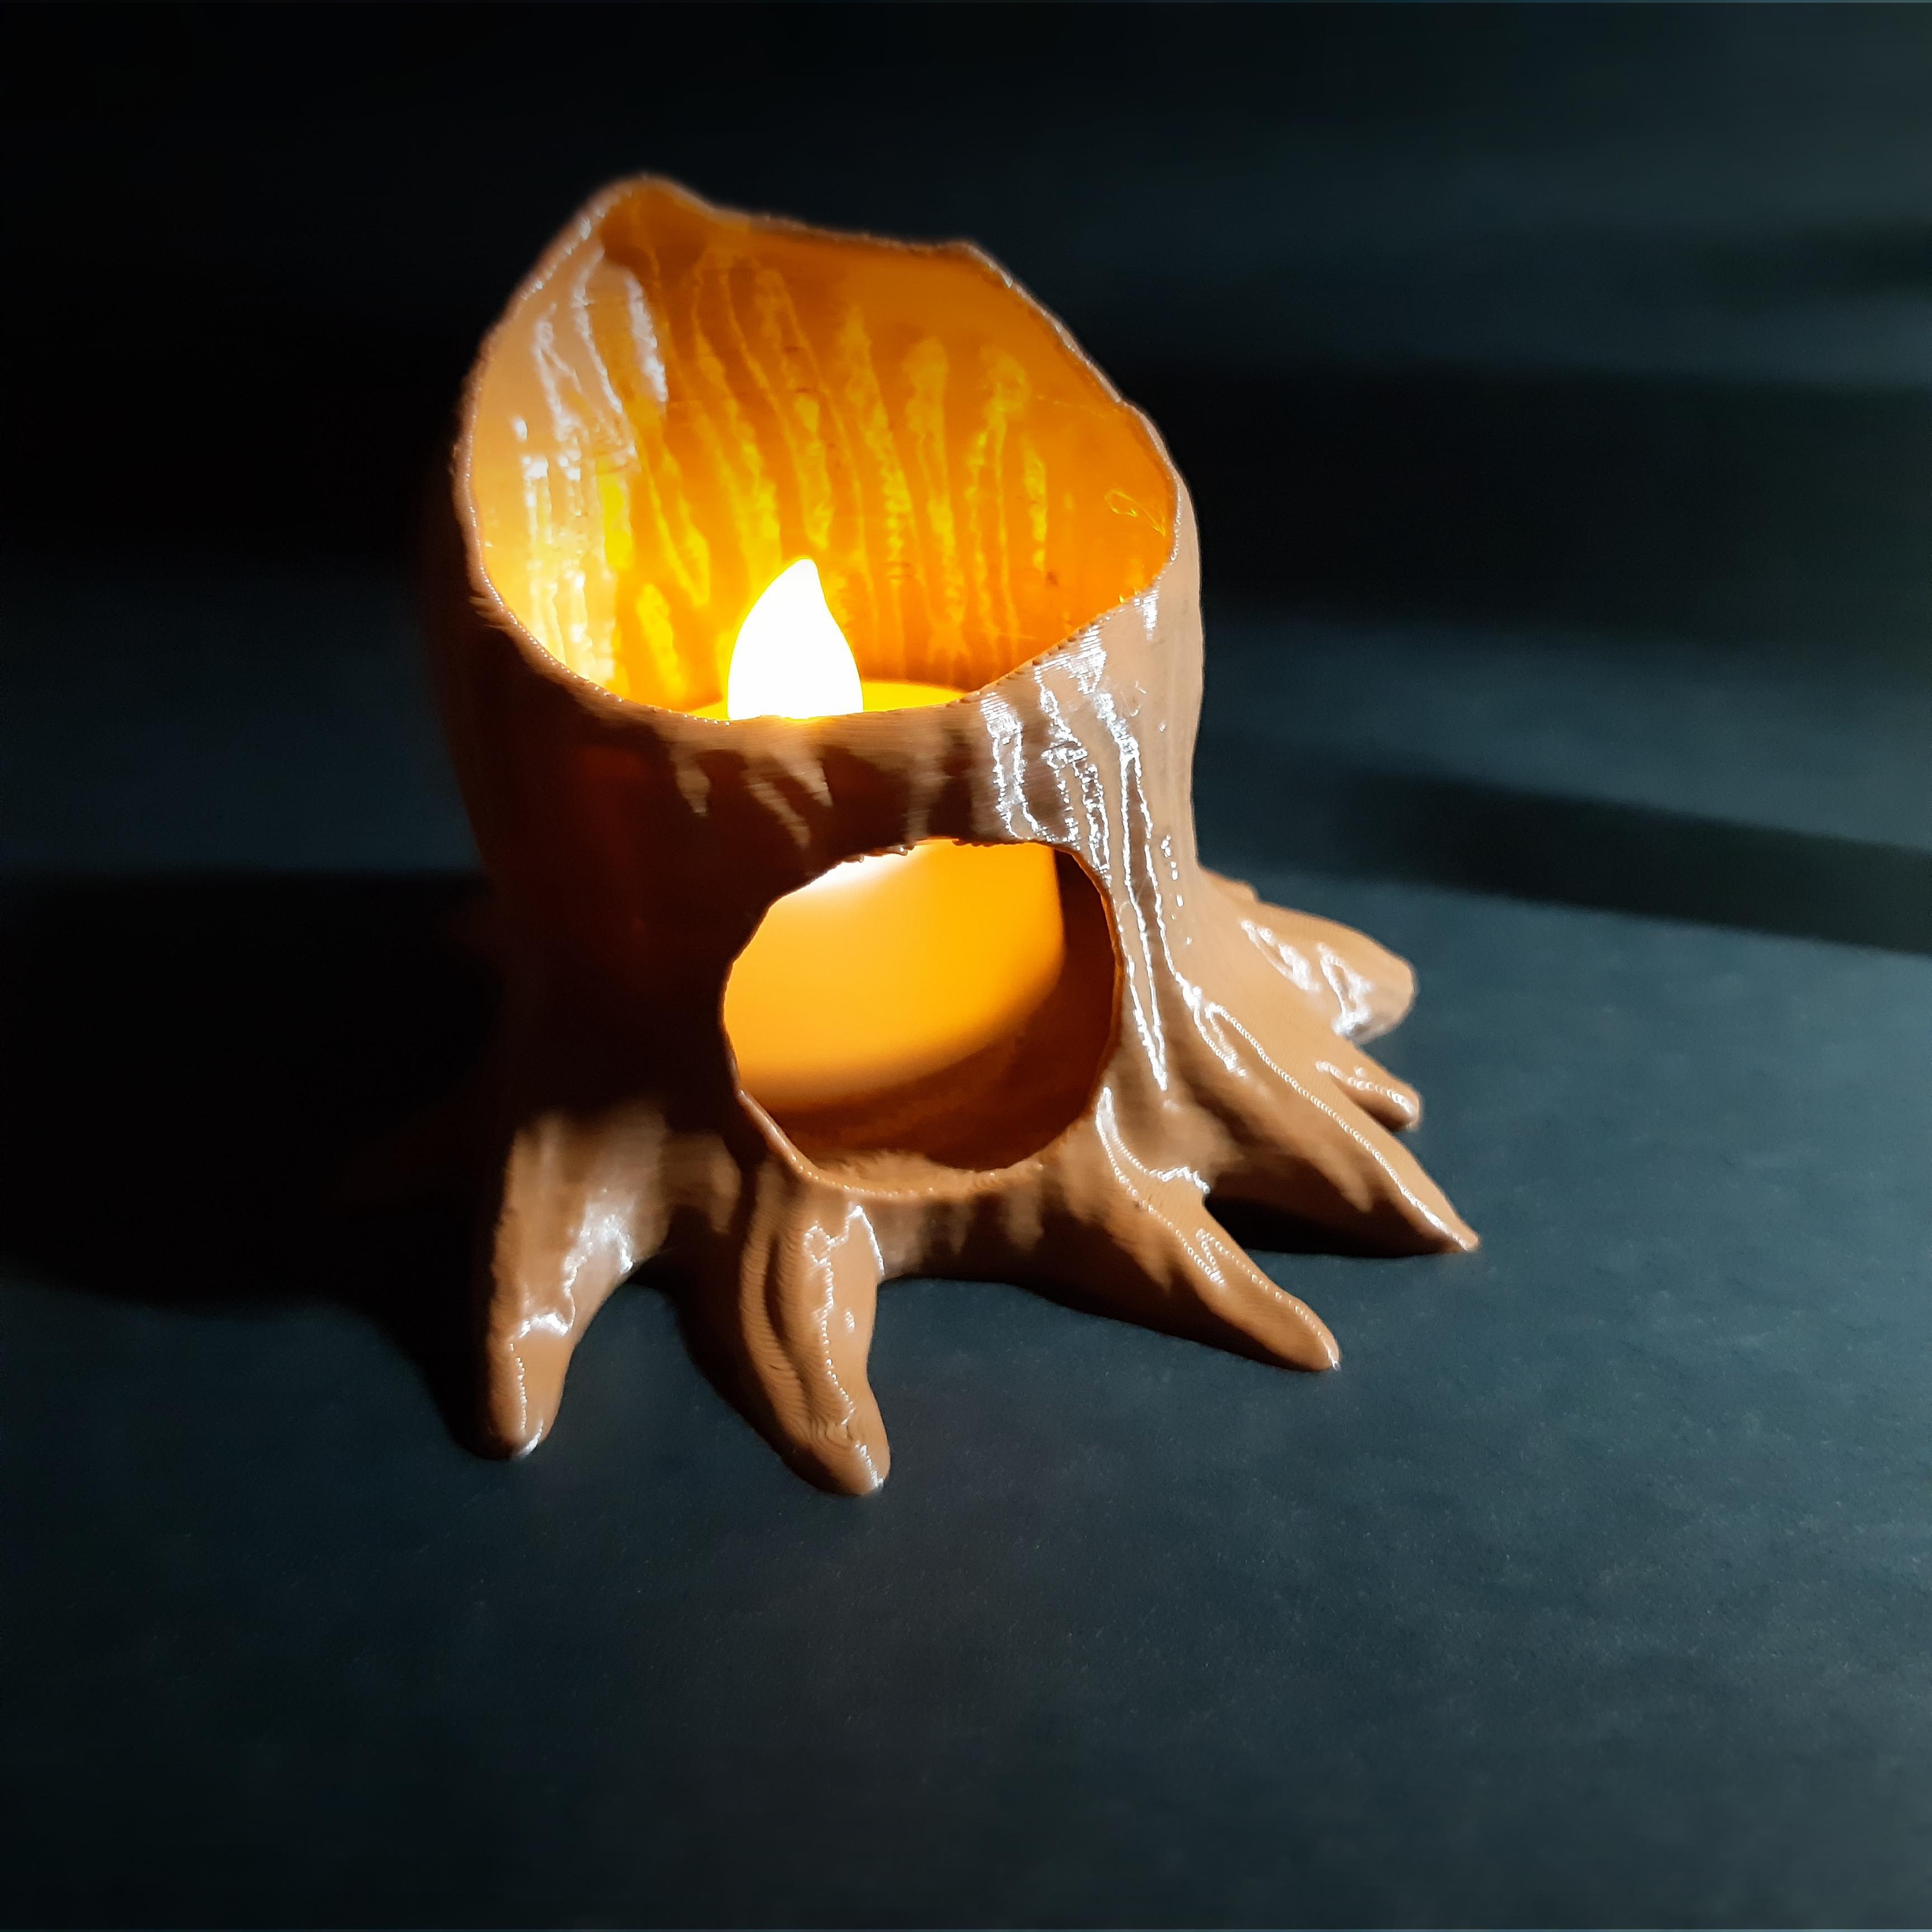 HOLLOW STUMP CONTAINER - PEN HOLDER - TEALIGHT HOLDER - PRINT-IN-PLACE - SUPPORT FREE 3d model